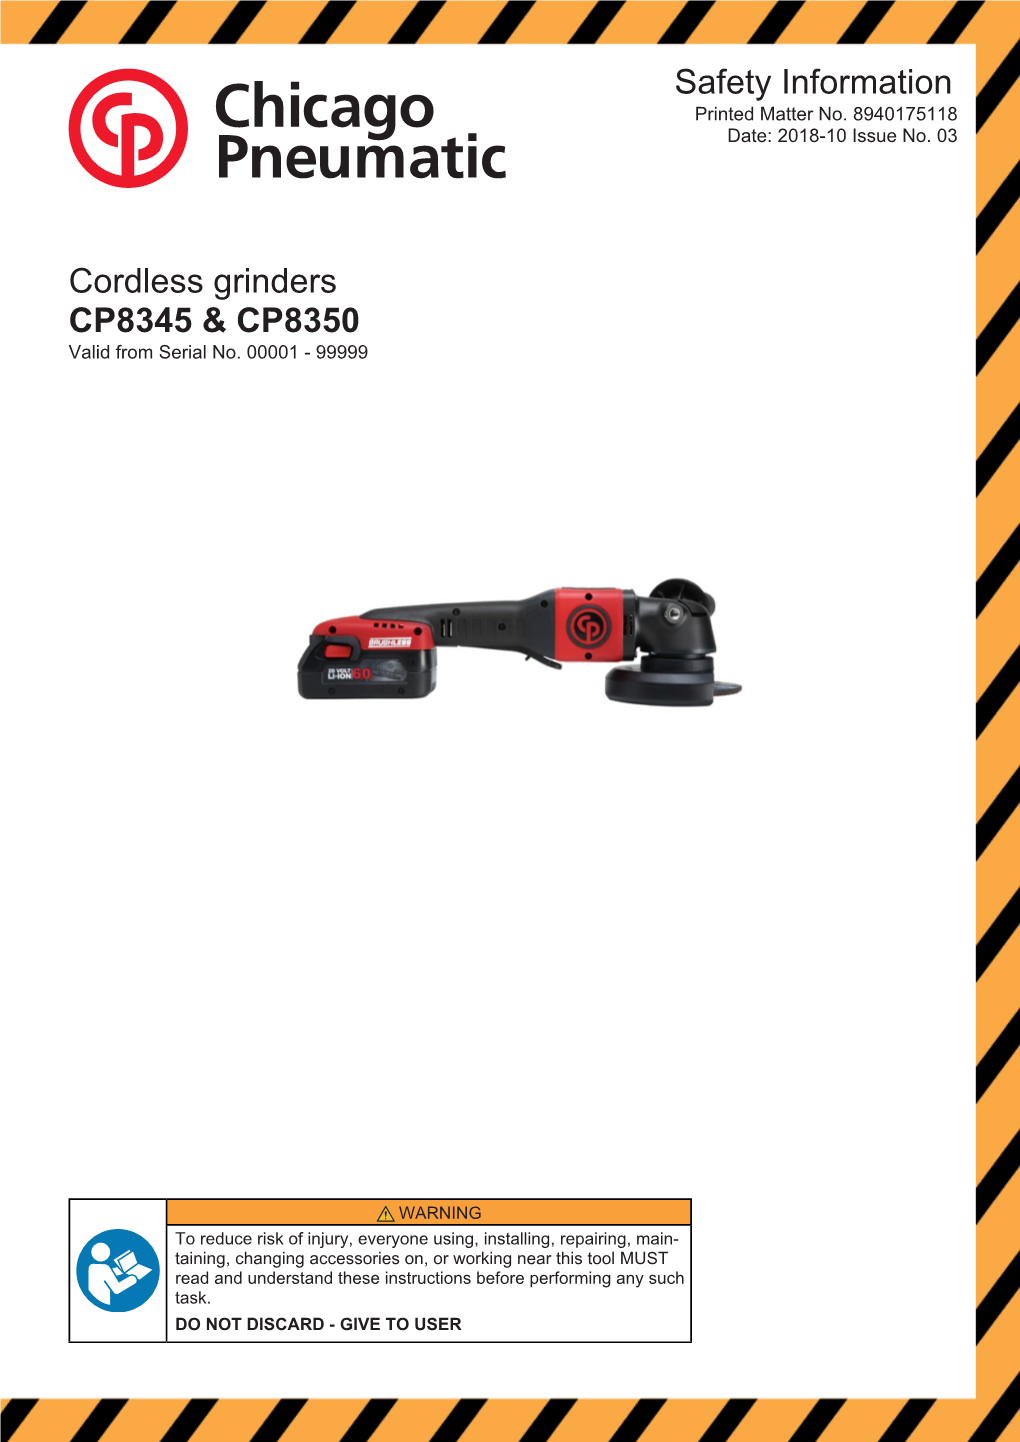 Safety Information Cordless Grinders CP8345 & CP8350